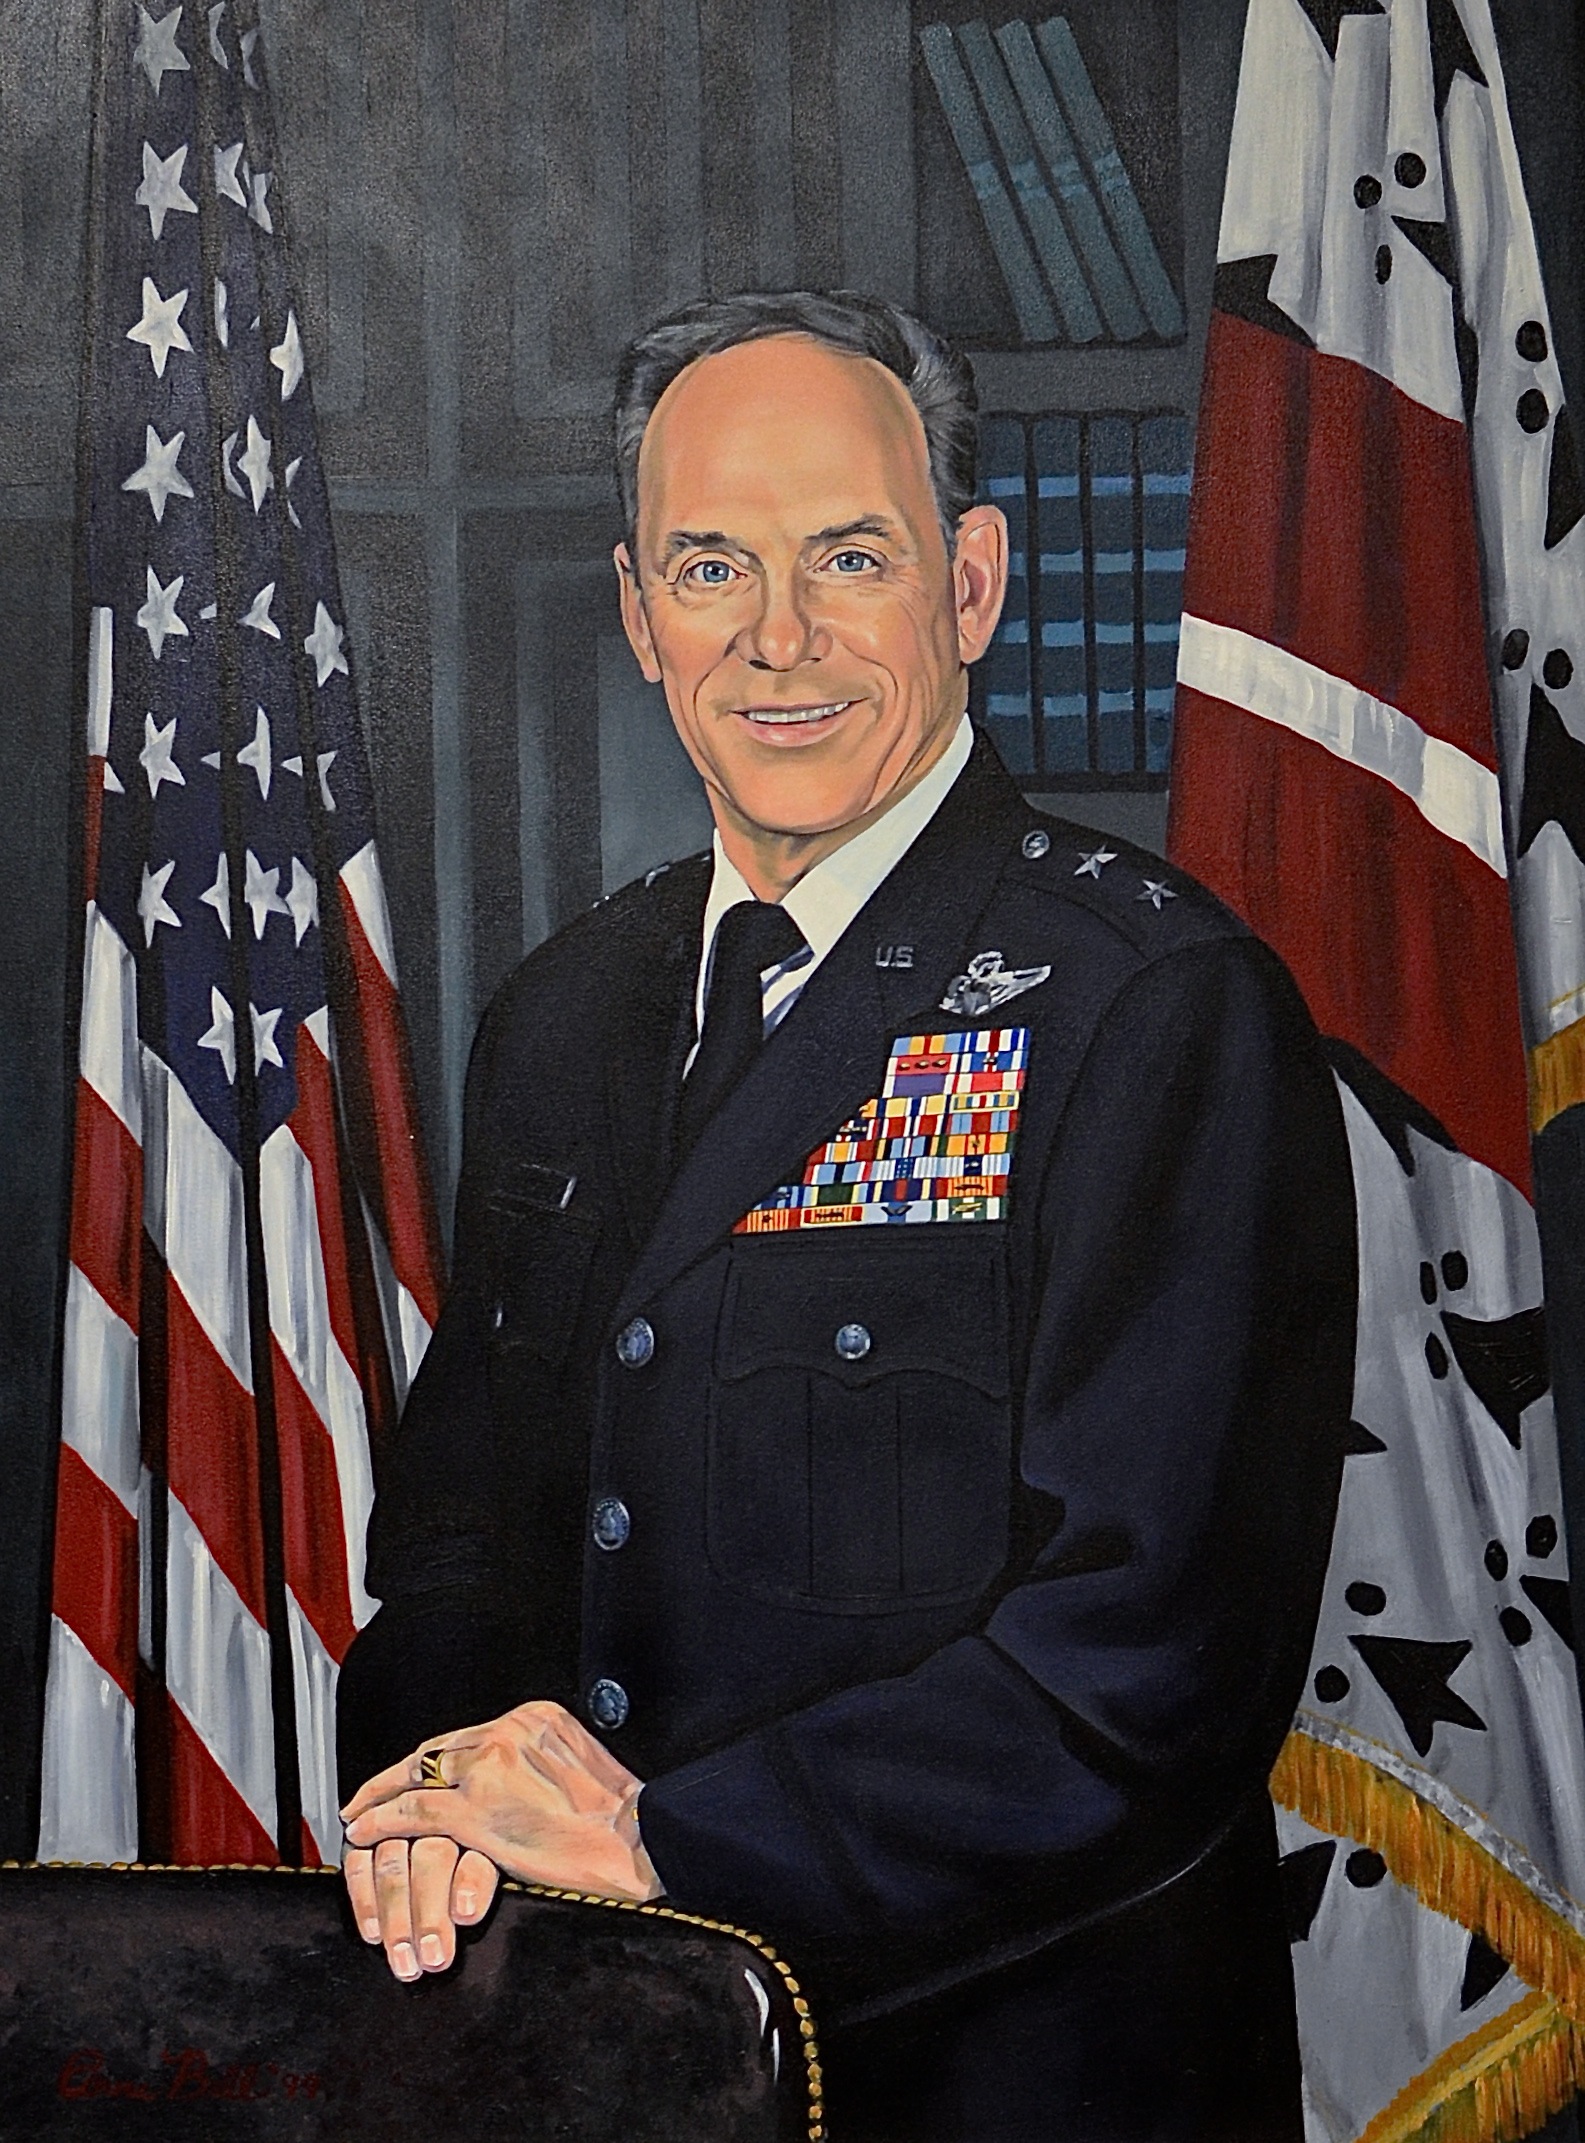 An oil painting of former Commandant Maj. Gen. Stanton Musser which hangs in Brodie Hall, one of the Corps of Cadets dorms.